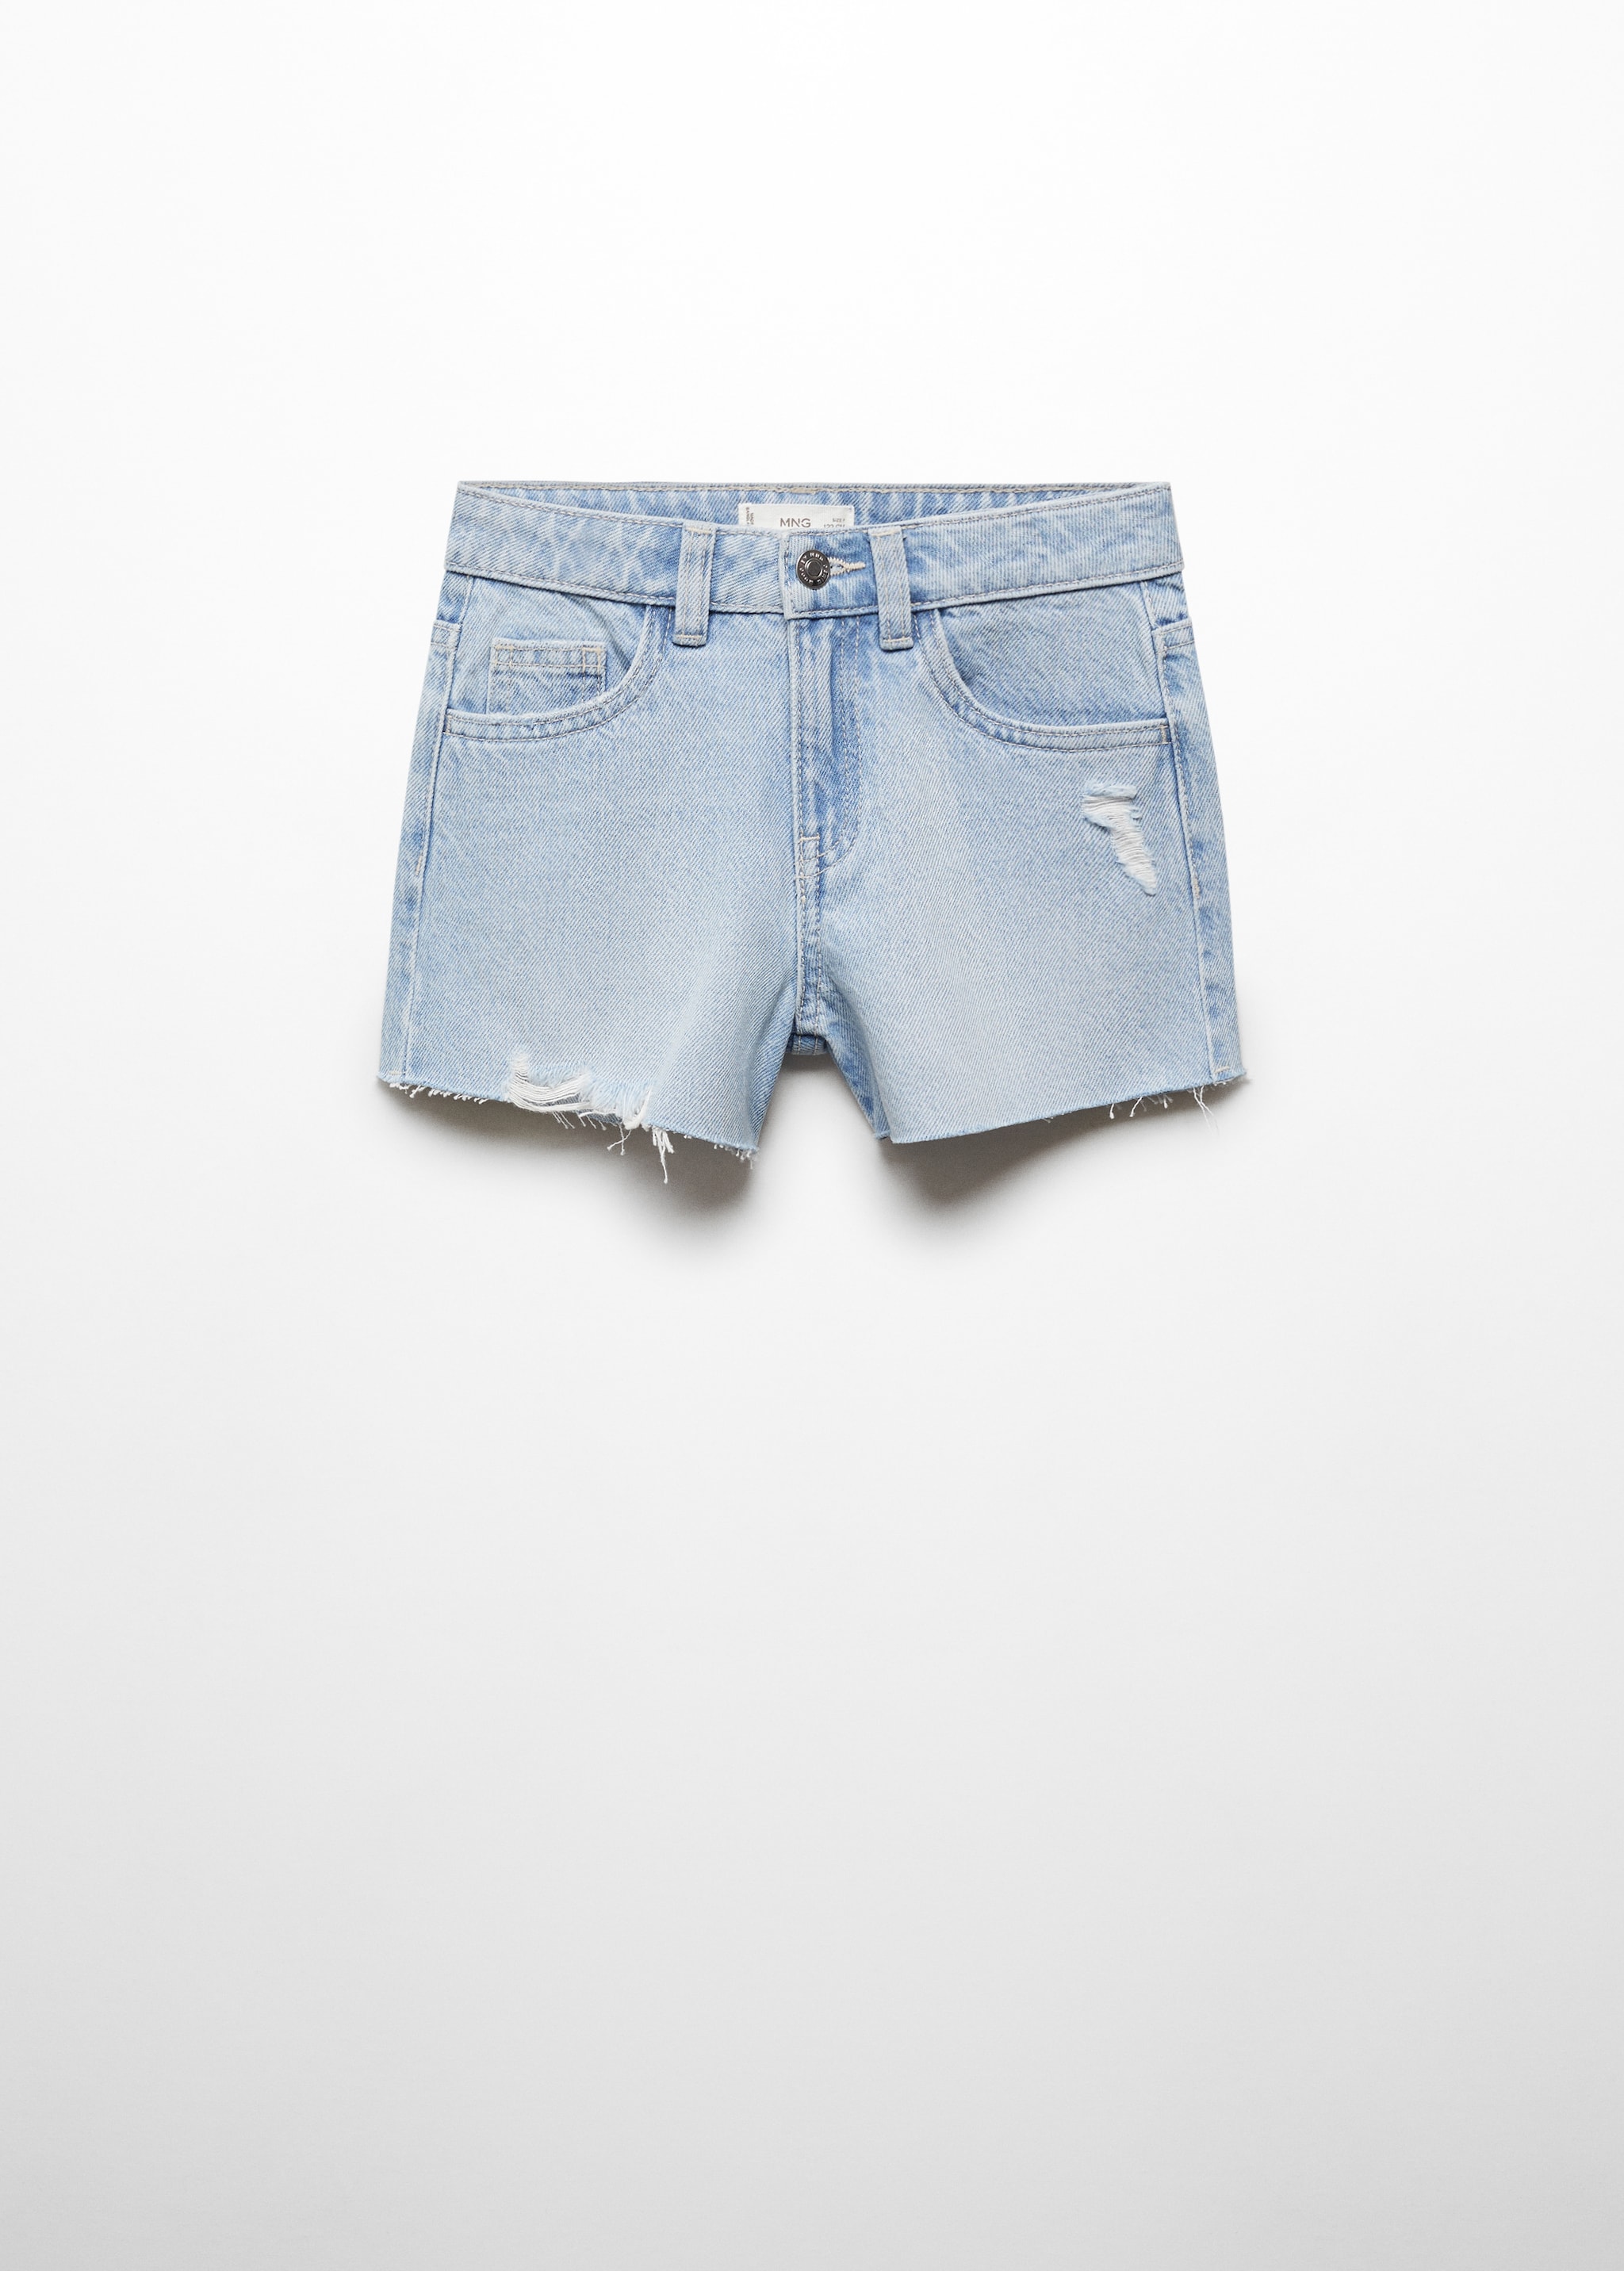 Decorative ripped denim shorts - Article without model